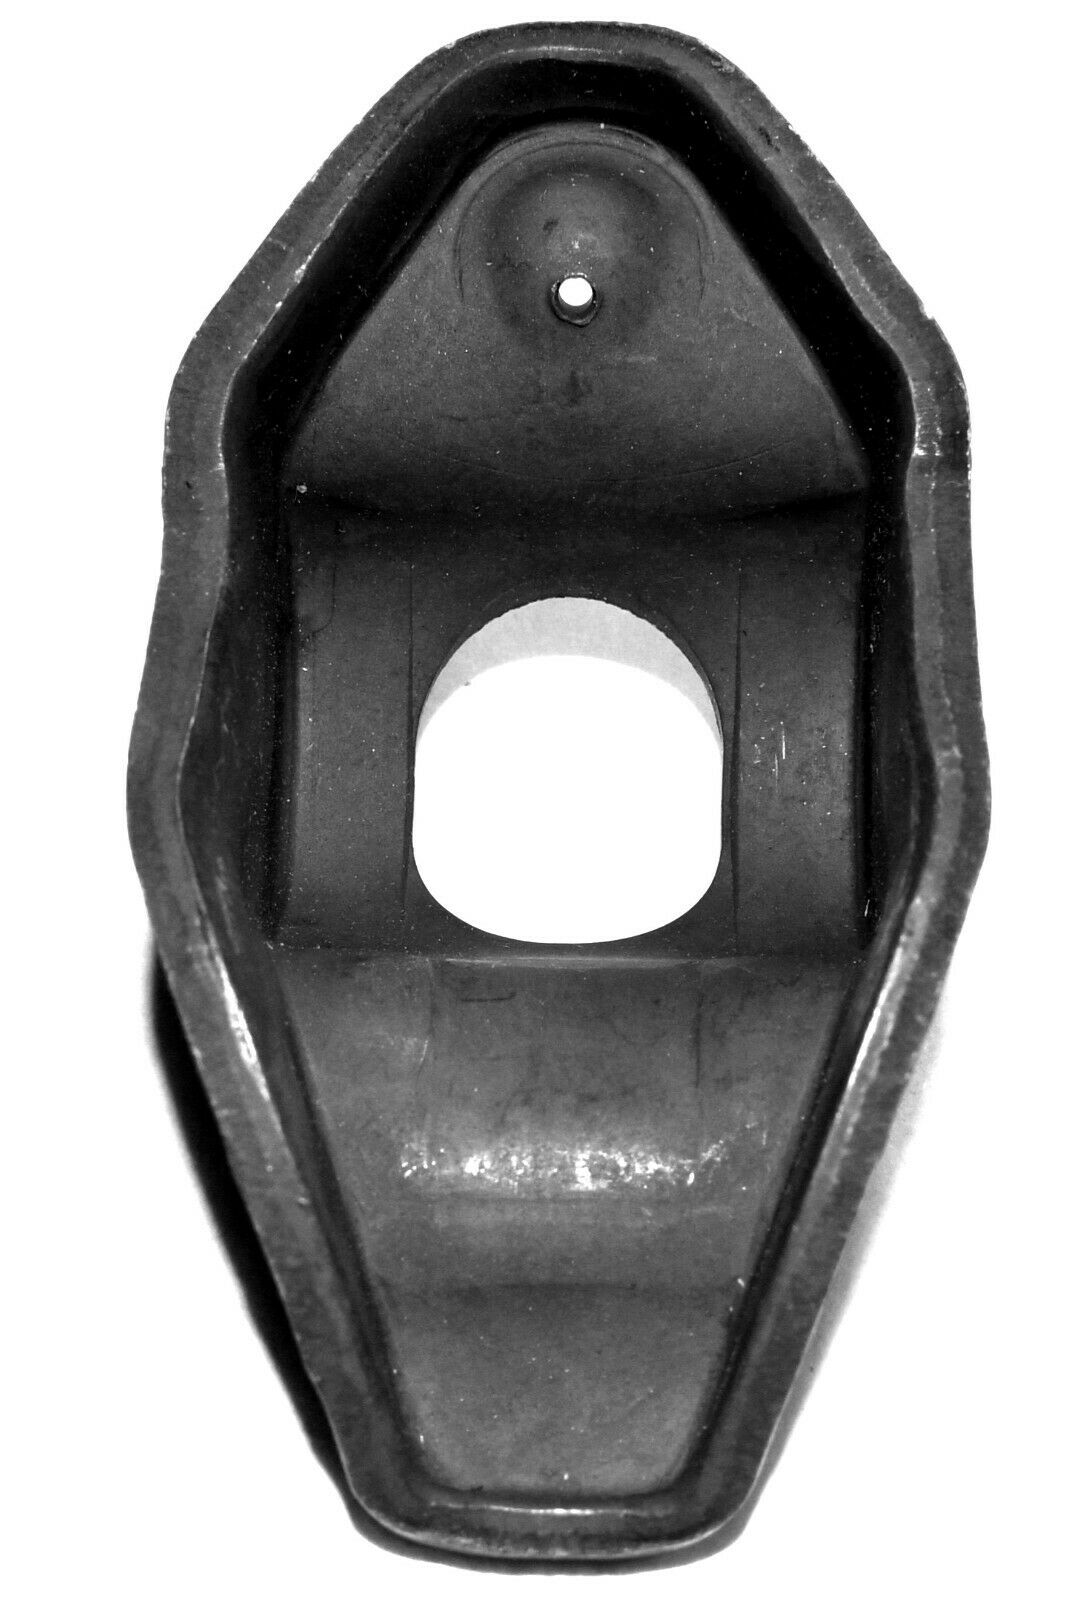 NEW Wolverine Rocker arm for 64-70 Olds Chevy Cadillac Buick Pontiac GMC 380015